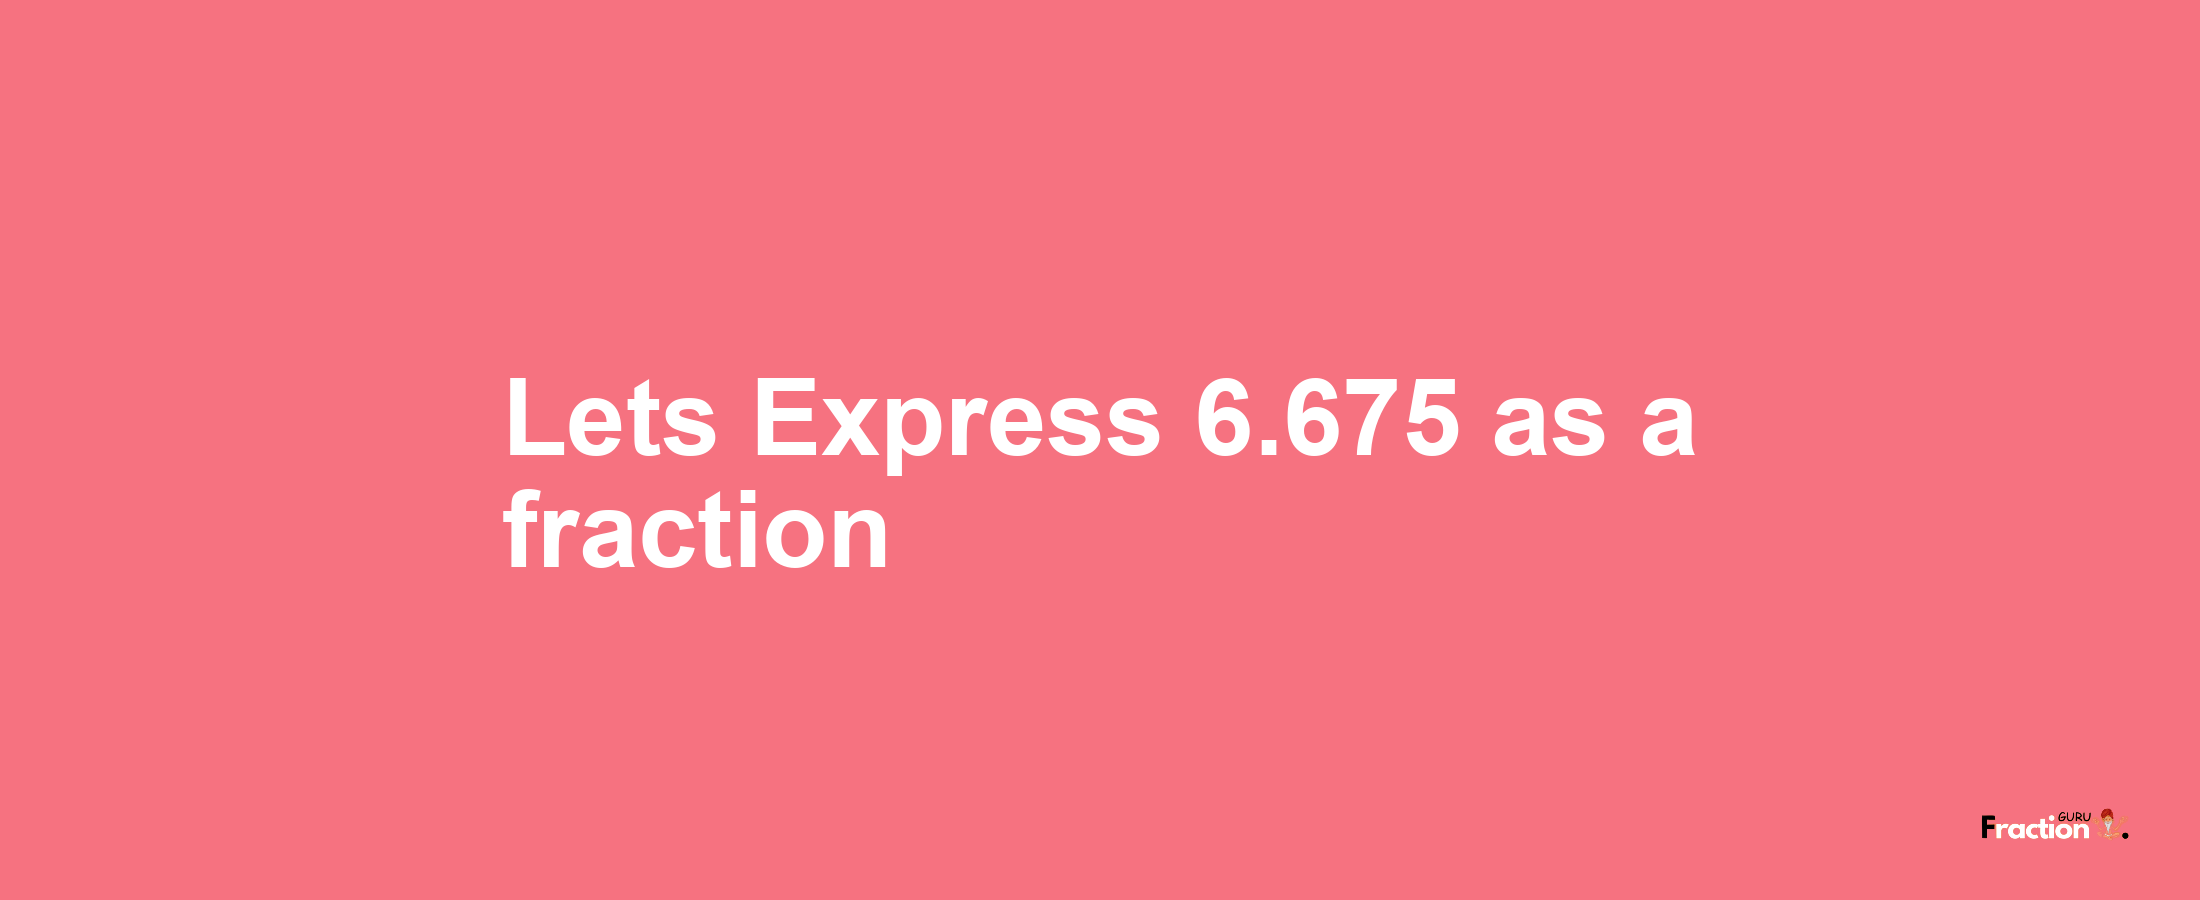 Lets Express 6.675 as afraction